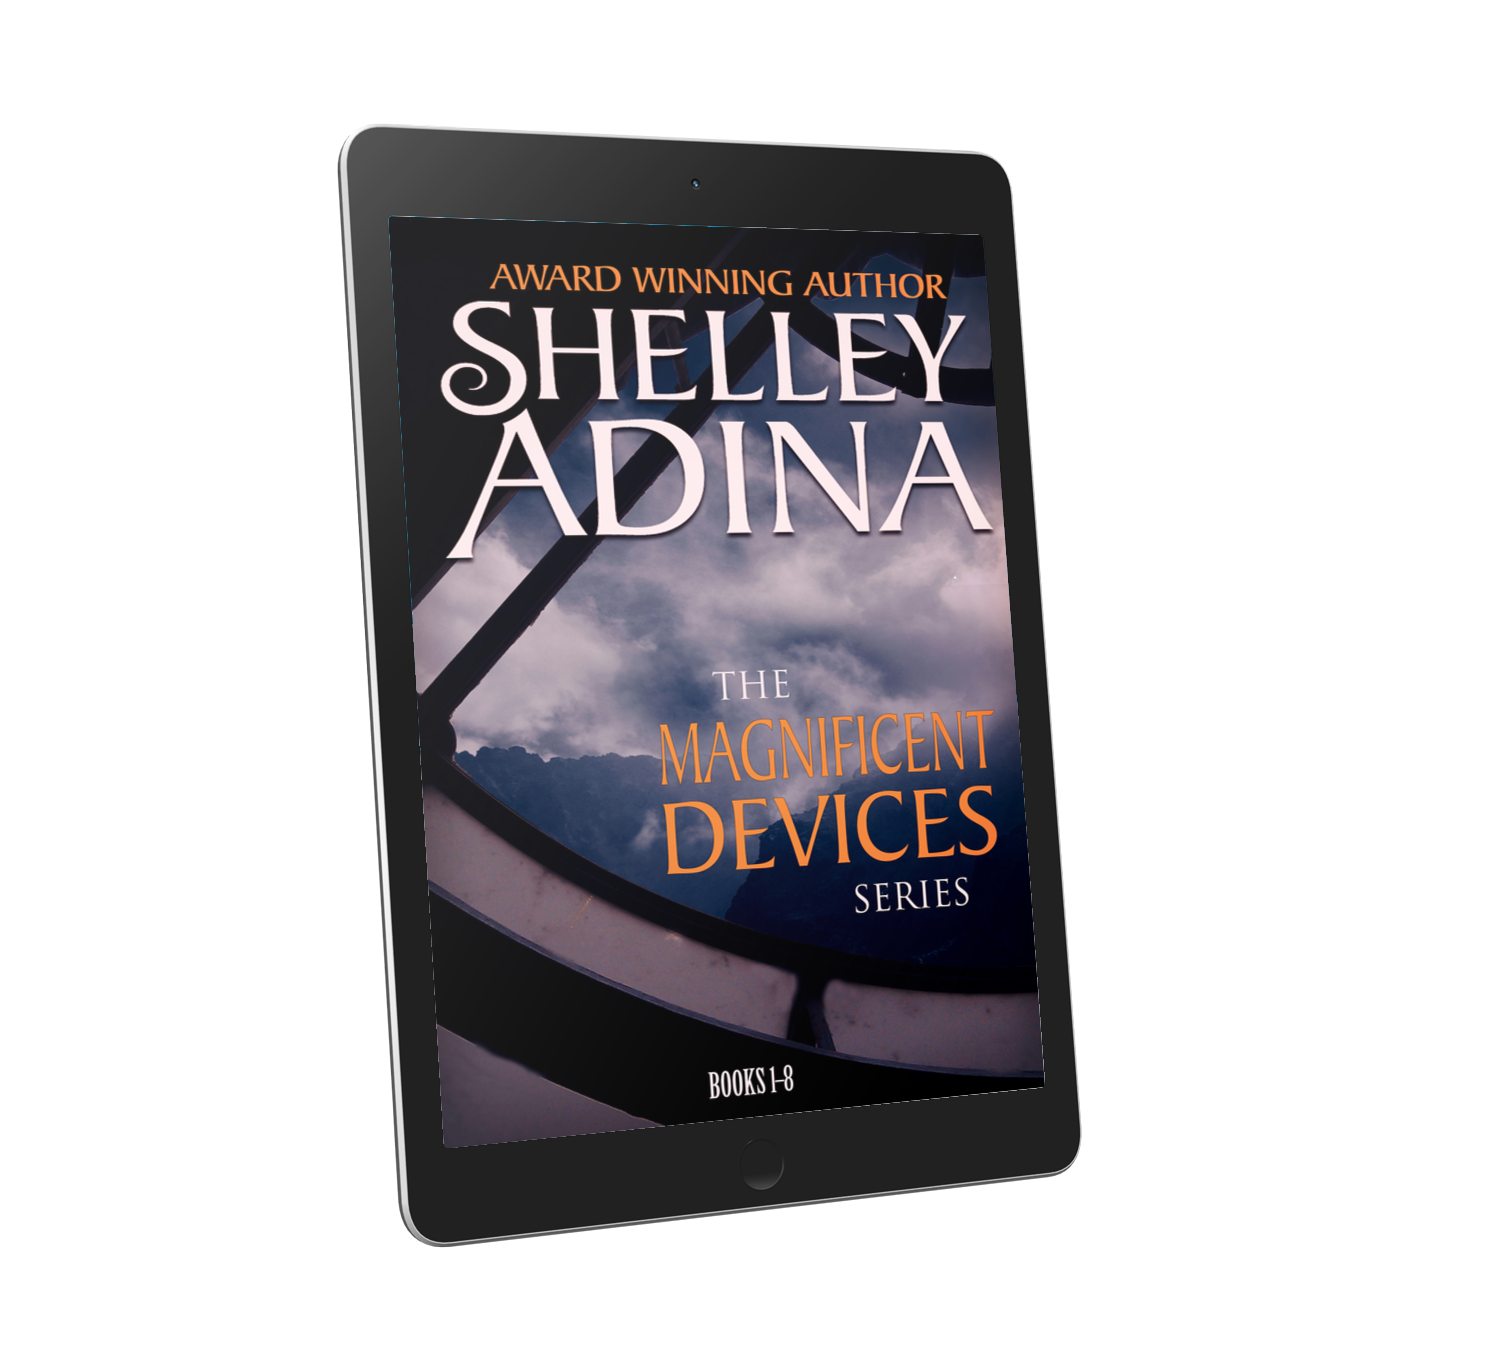 Magnificent Devices book 1-8 box set by Shelley Adina